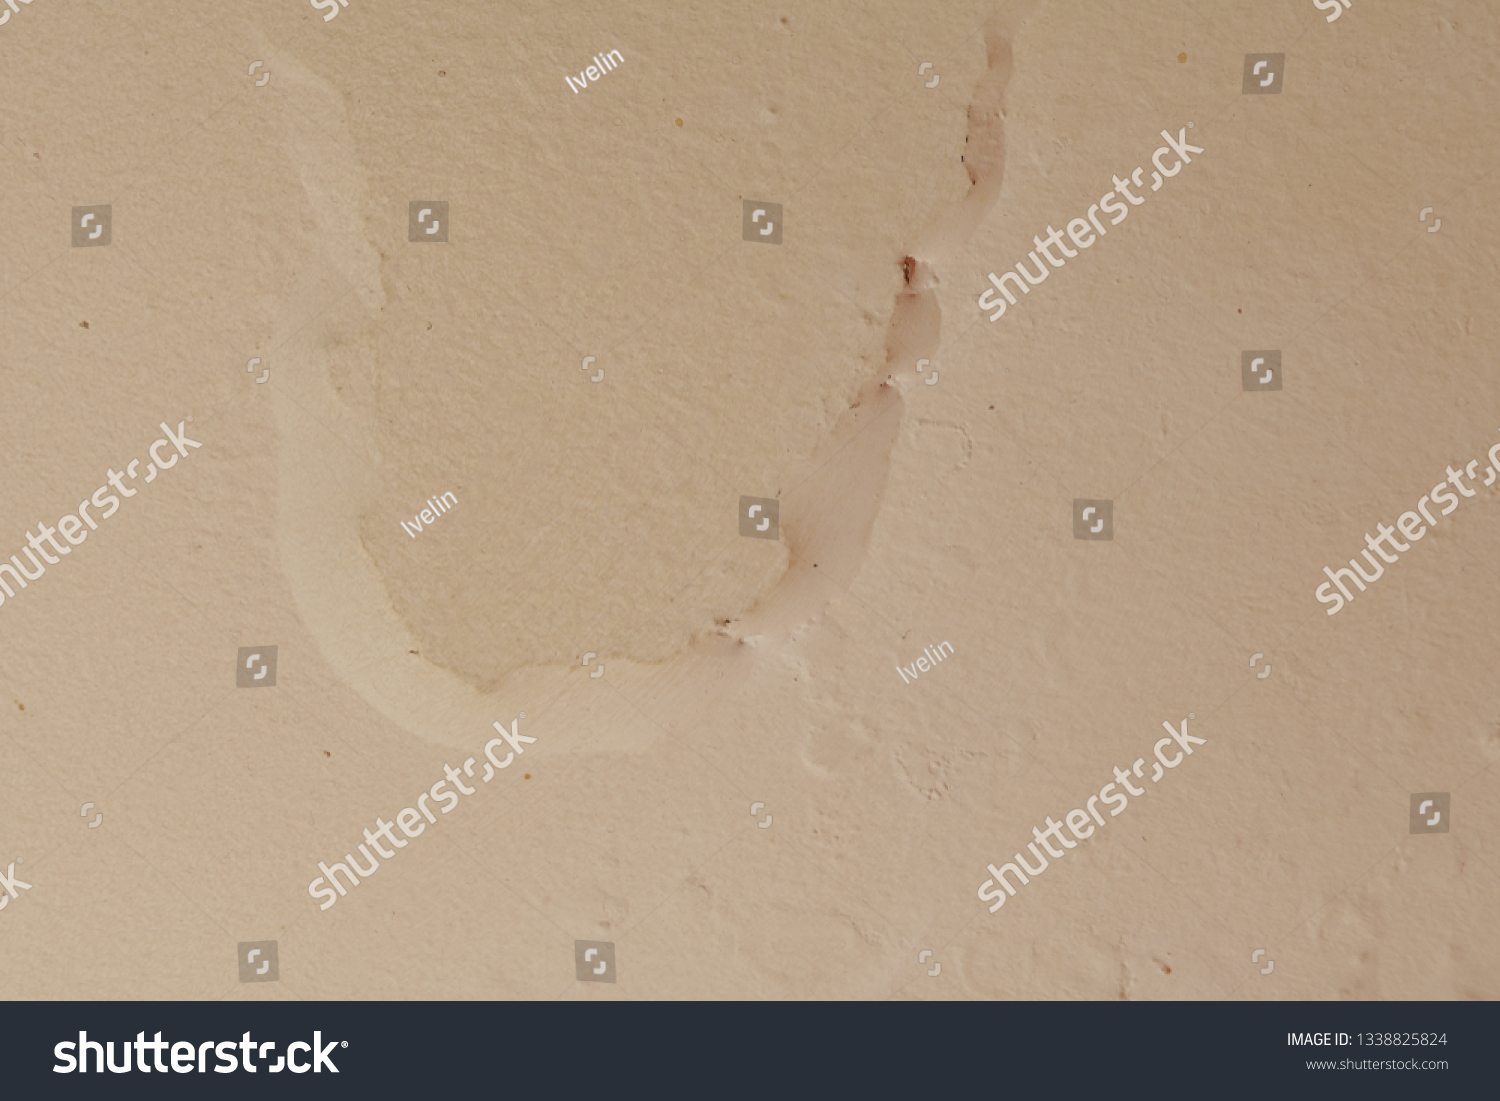 Flooded Cracked Plaster On Ceiling Stock Photo Edit Now